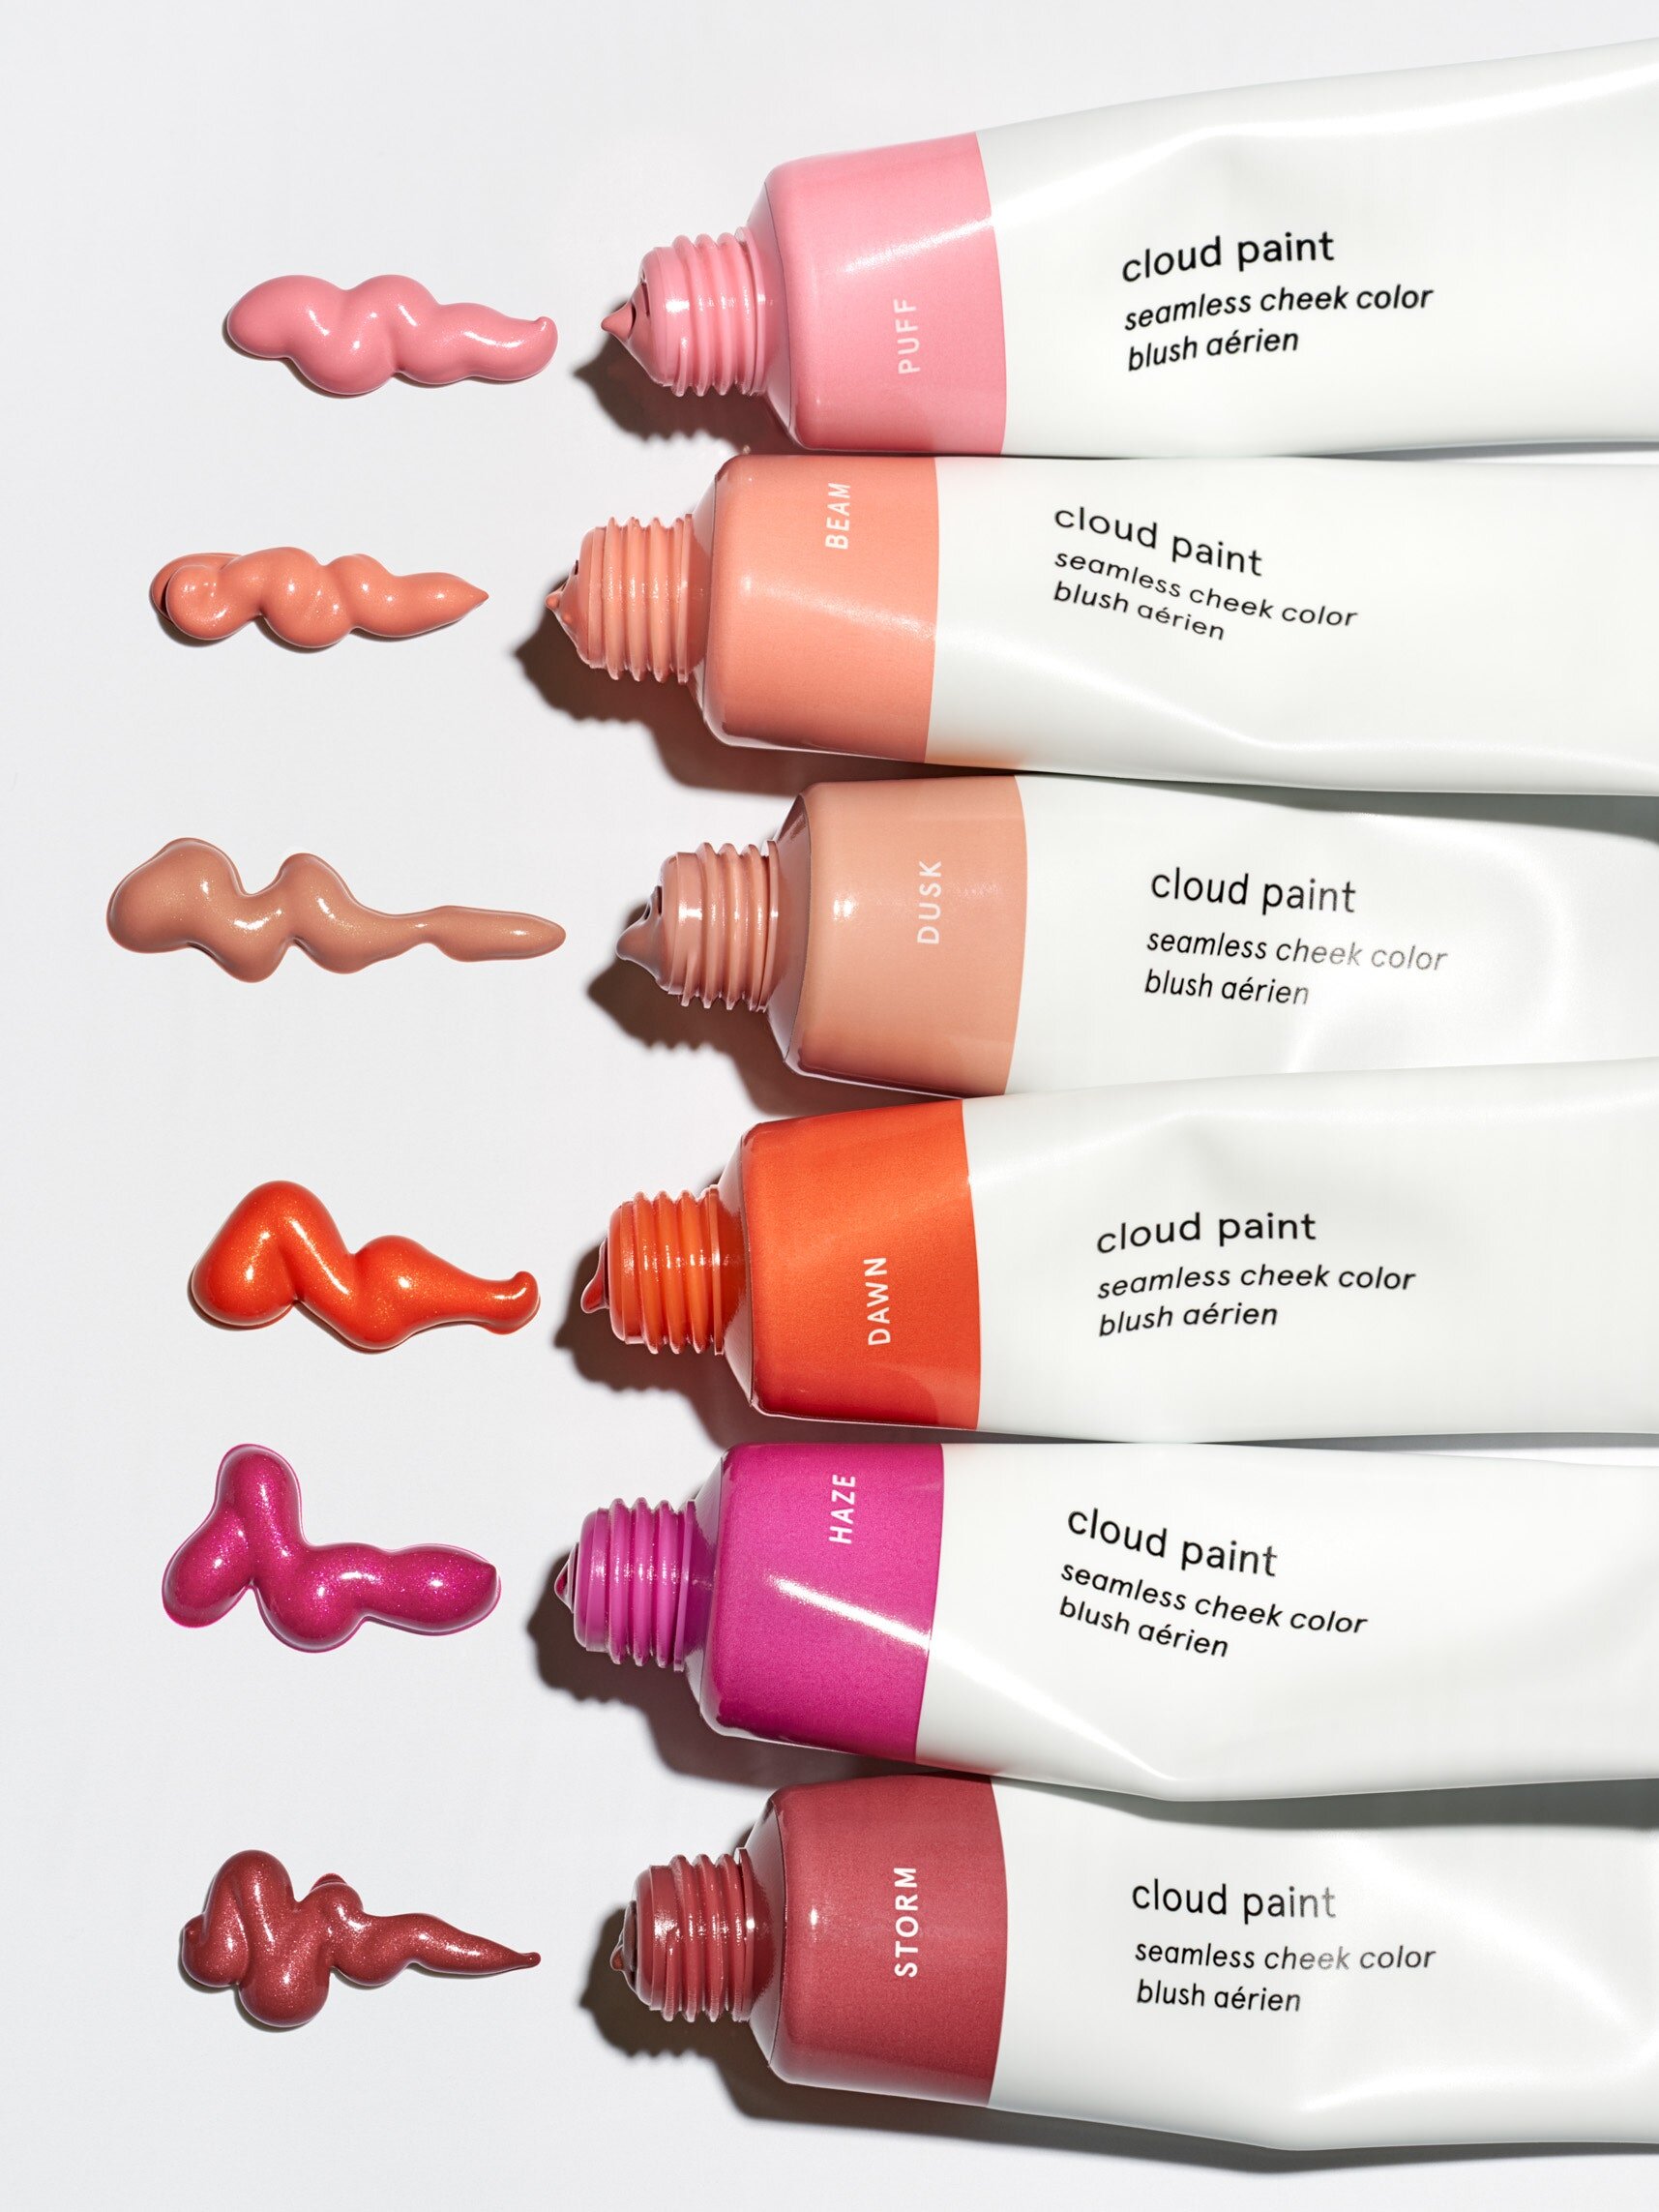 5 Simple Reasons Why Glossier is a Marketing Genius — Brittany Waterson